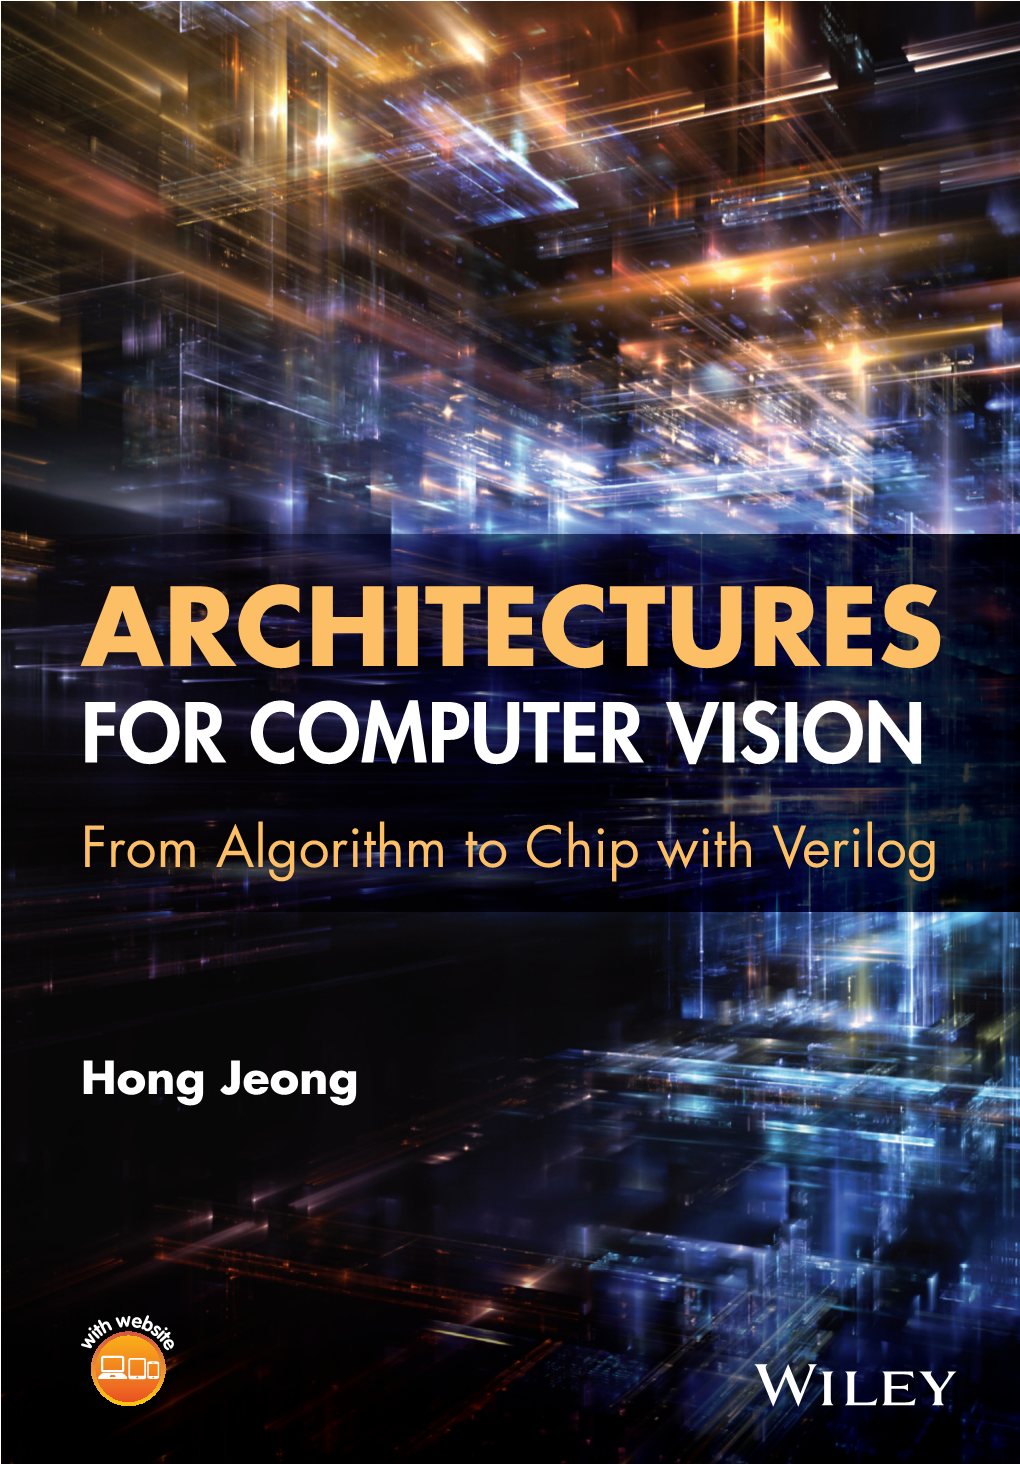 Architectures for Computer Vision: from Algorithm to Chip with Verilog, First Edition